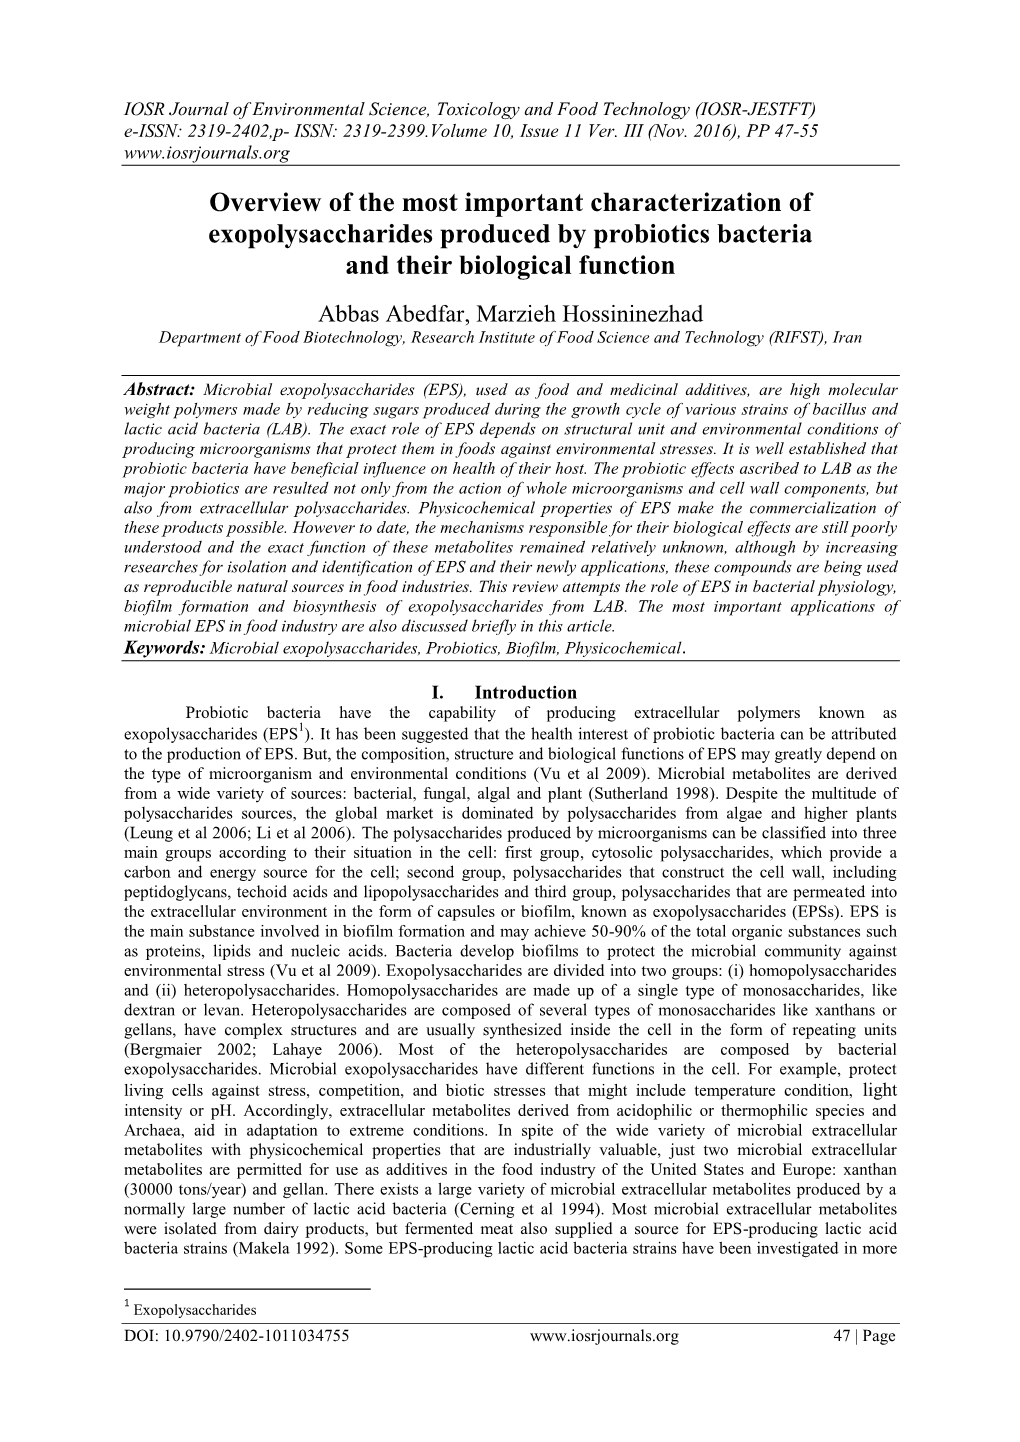 Overview of the Most Important Characterization of Exopolysaccharides Produced by Probiotics Bacteria and Their Biological Function